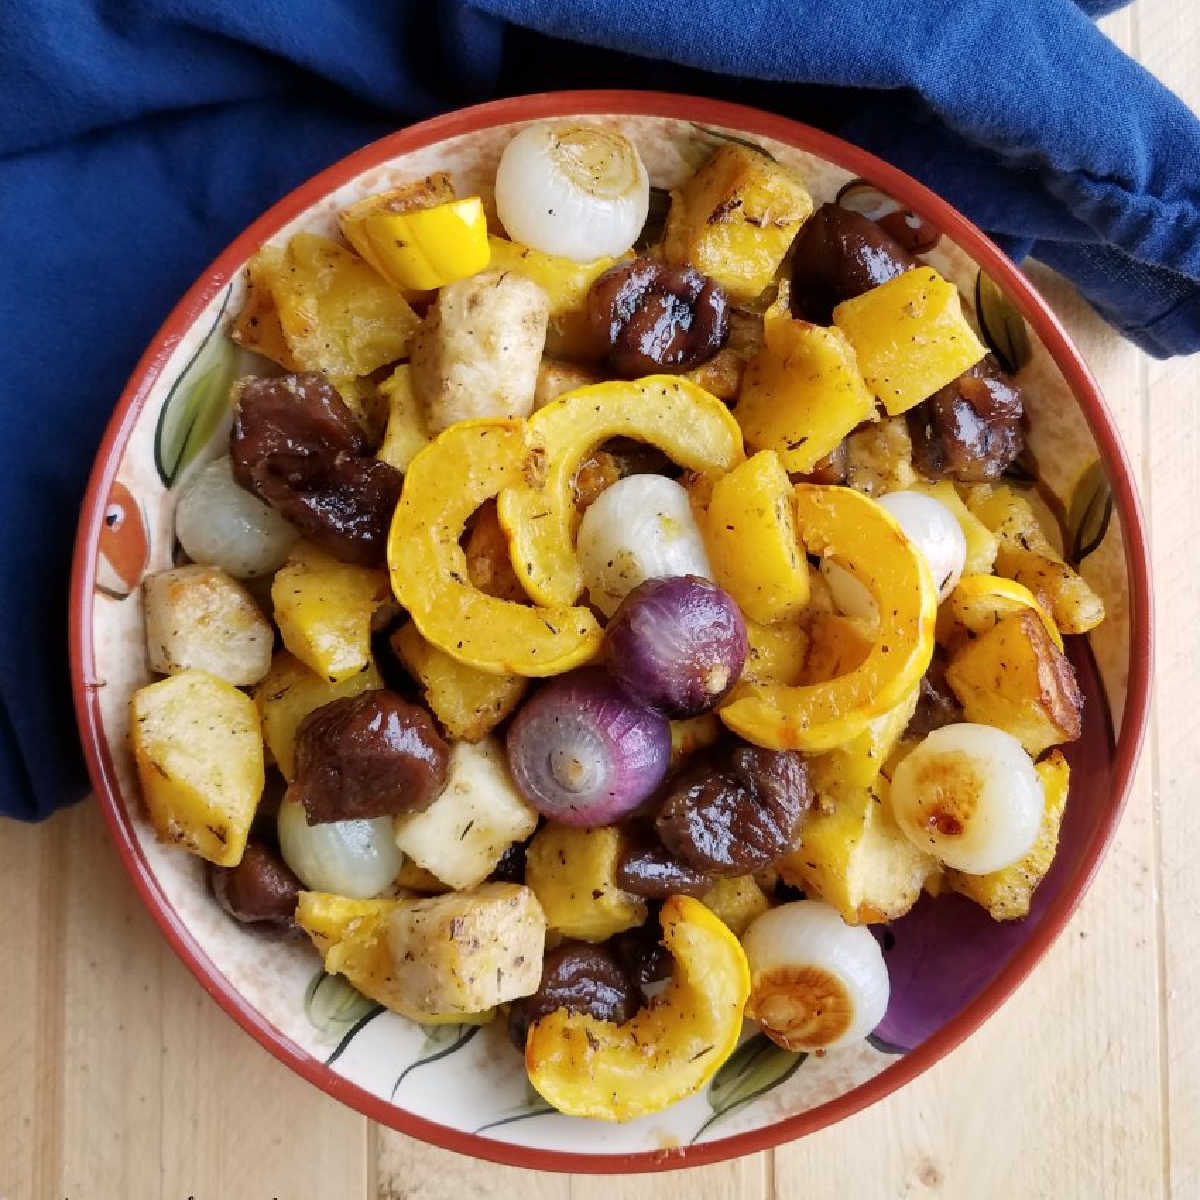 bowl of roasted fall vegetables with chestnuts in a maple glaze ready to serve.